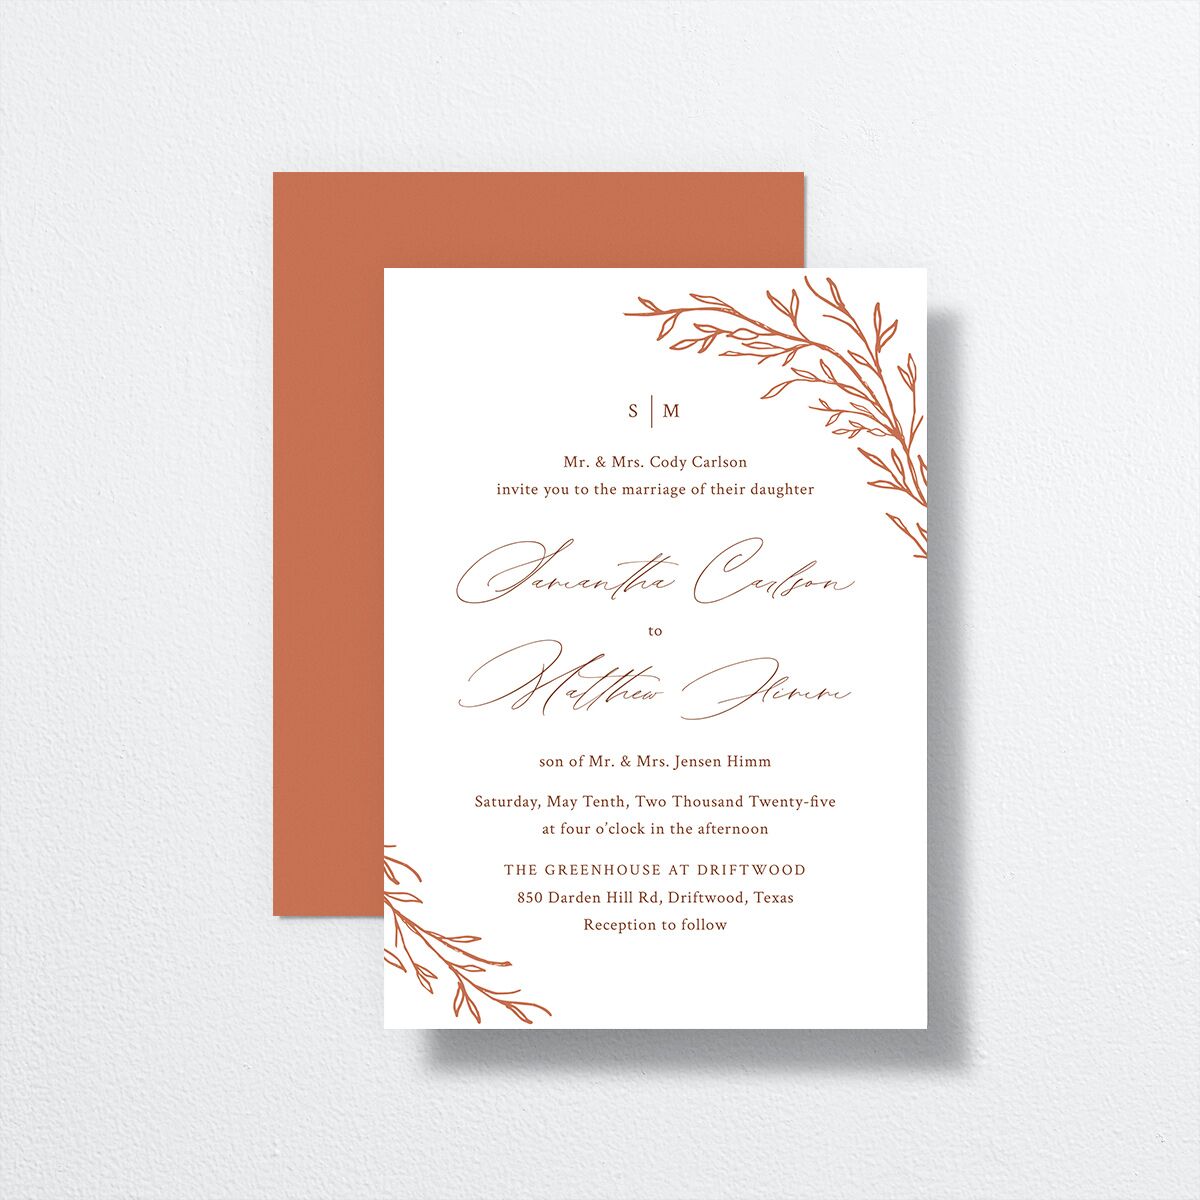 Rustic Branches Wedding Invitations front-and-back in red